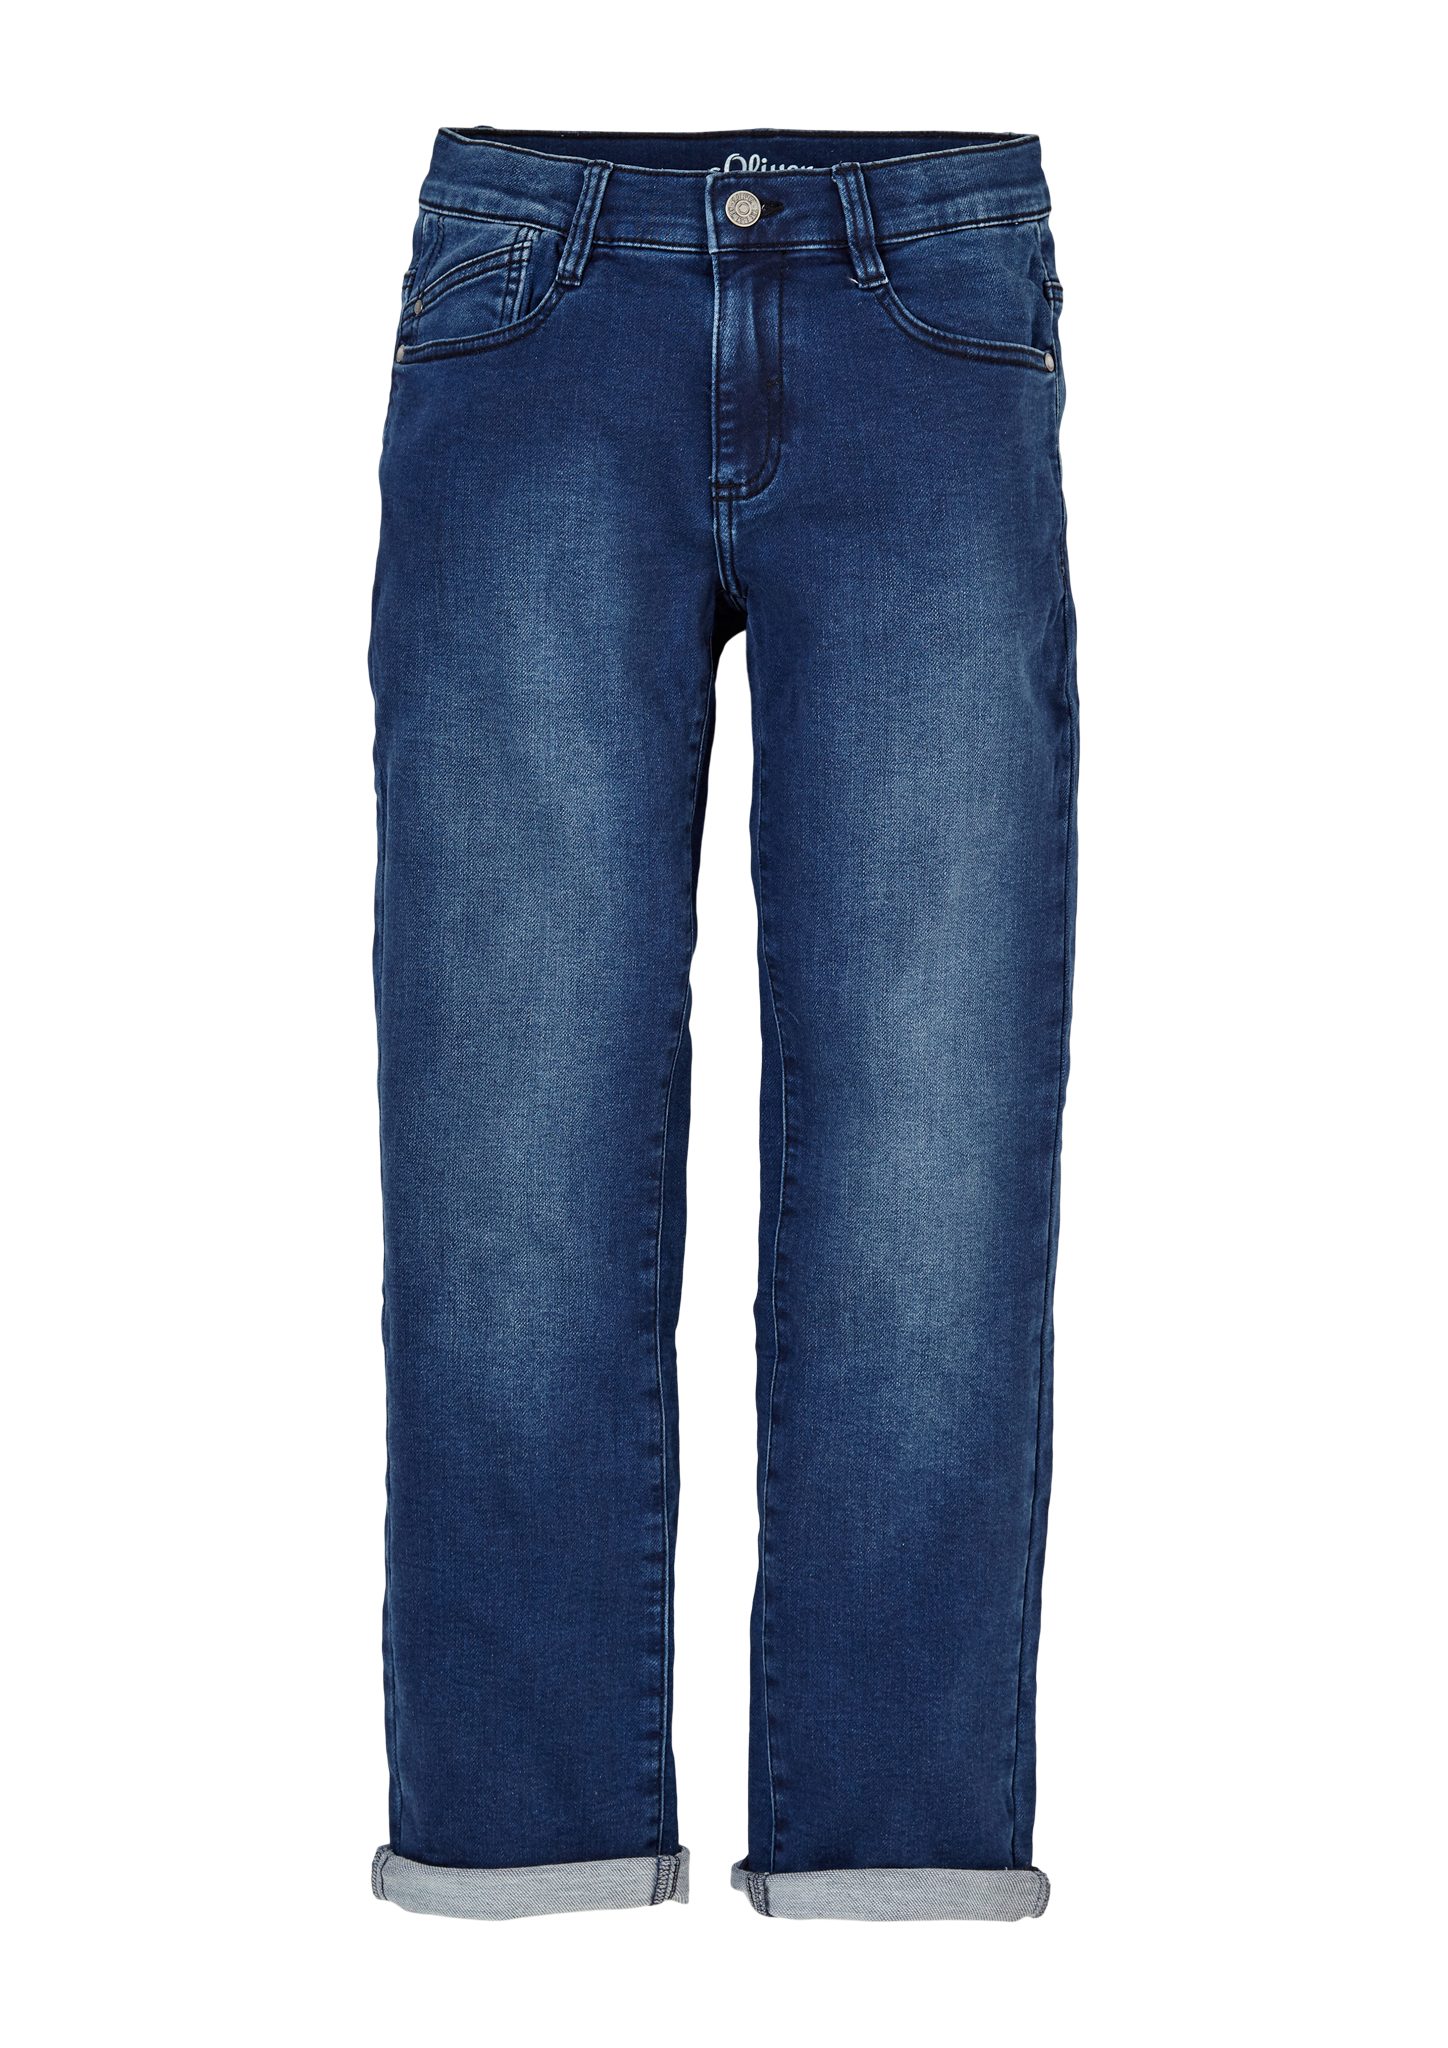 Leg Fit 5-Pocket-Jeans / Waschung / Mid Pete s.Oliver Jeans Regular / Straight Rise